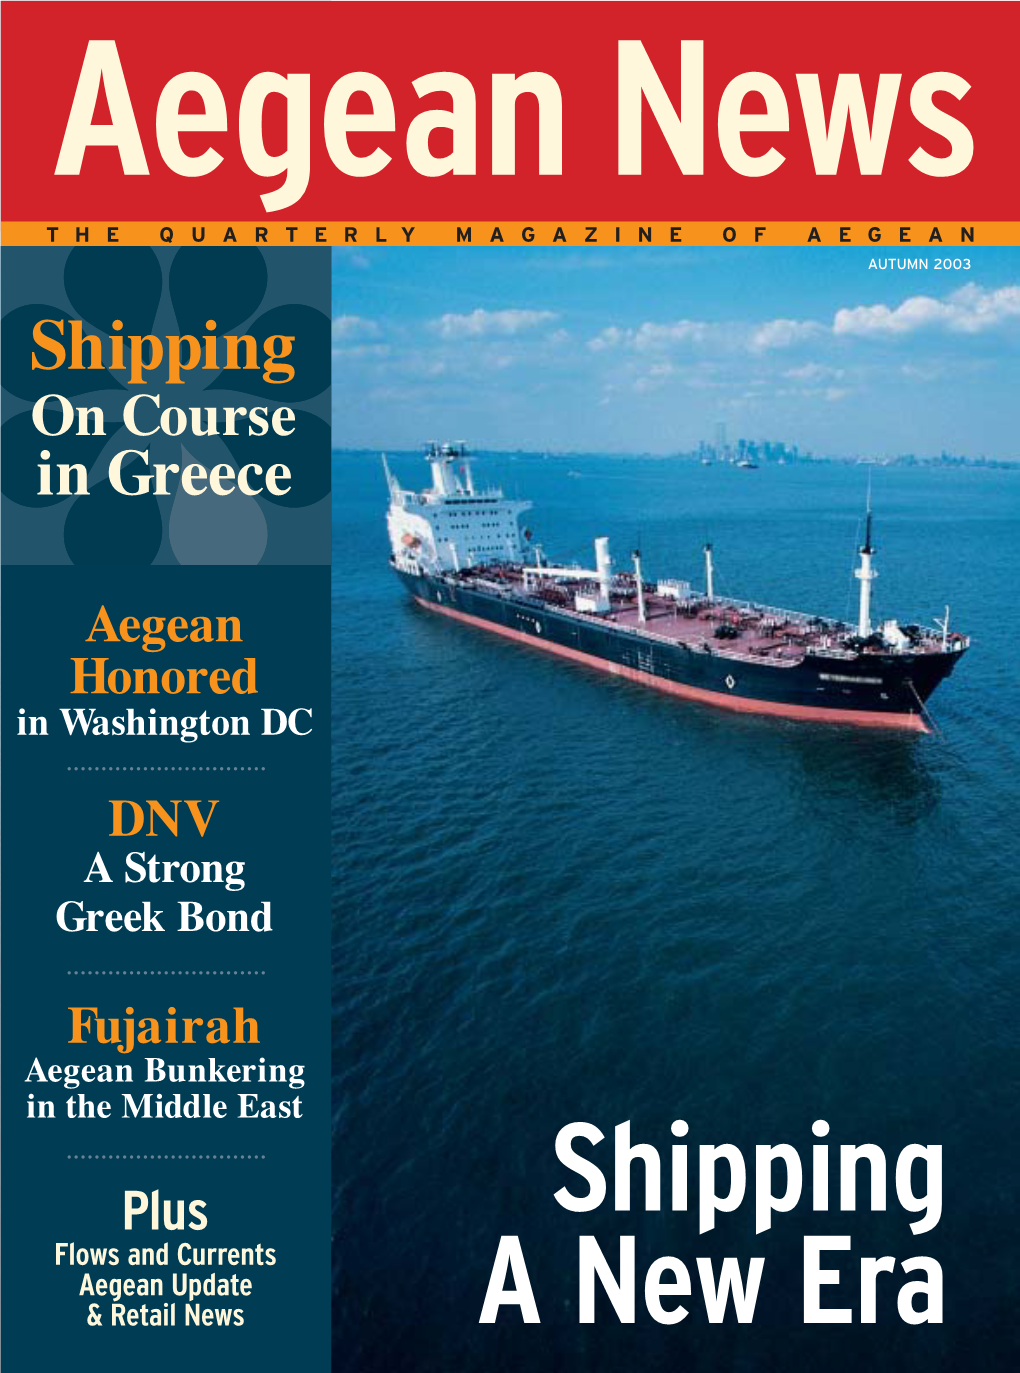 Shipping on Course in Greece